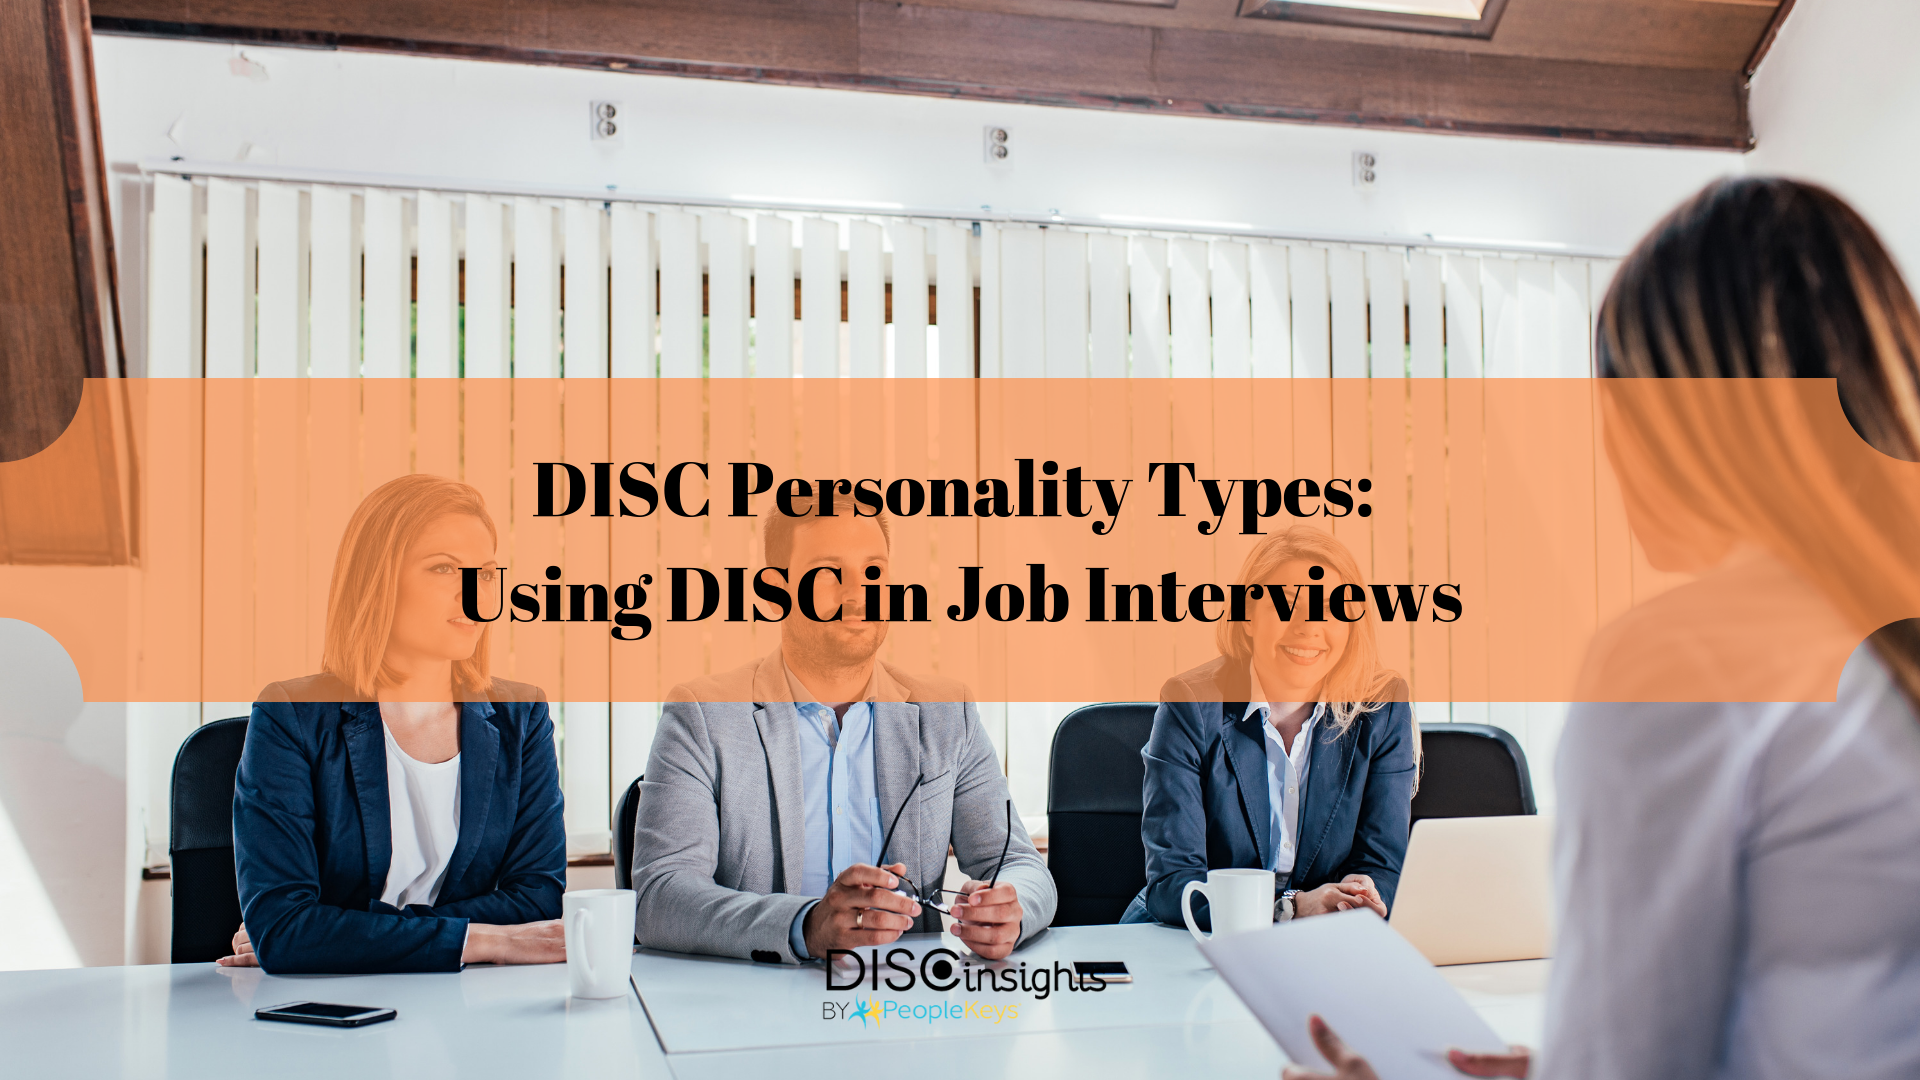 DISC Personality Types_ Using DISC in Job Interviews